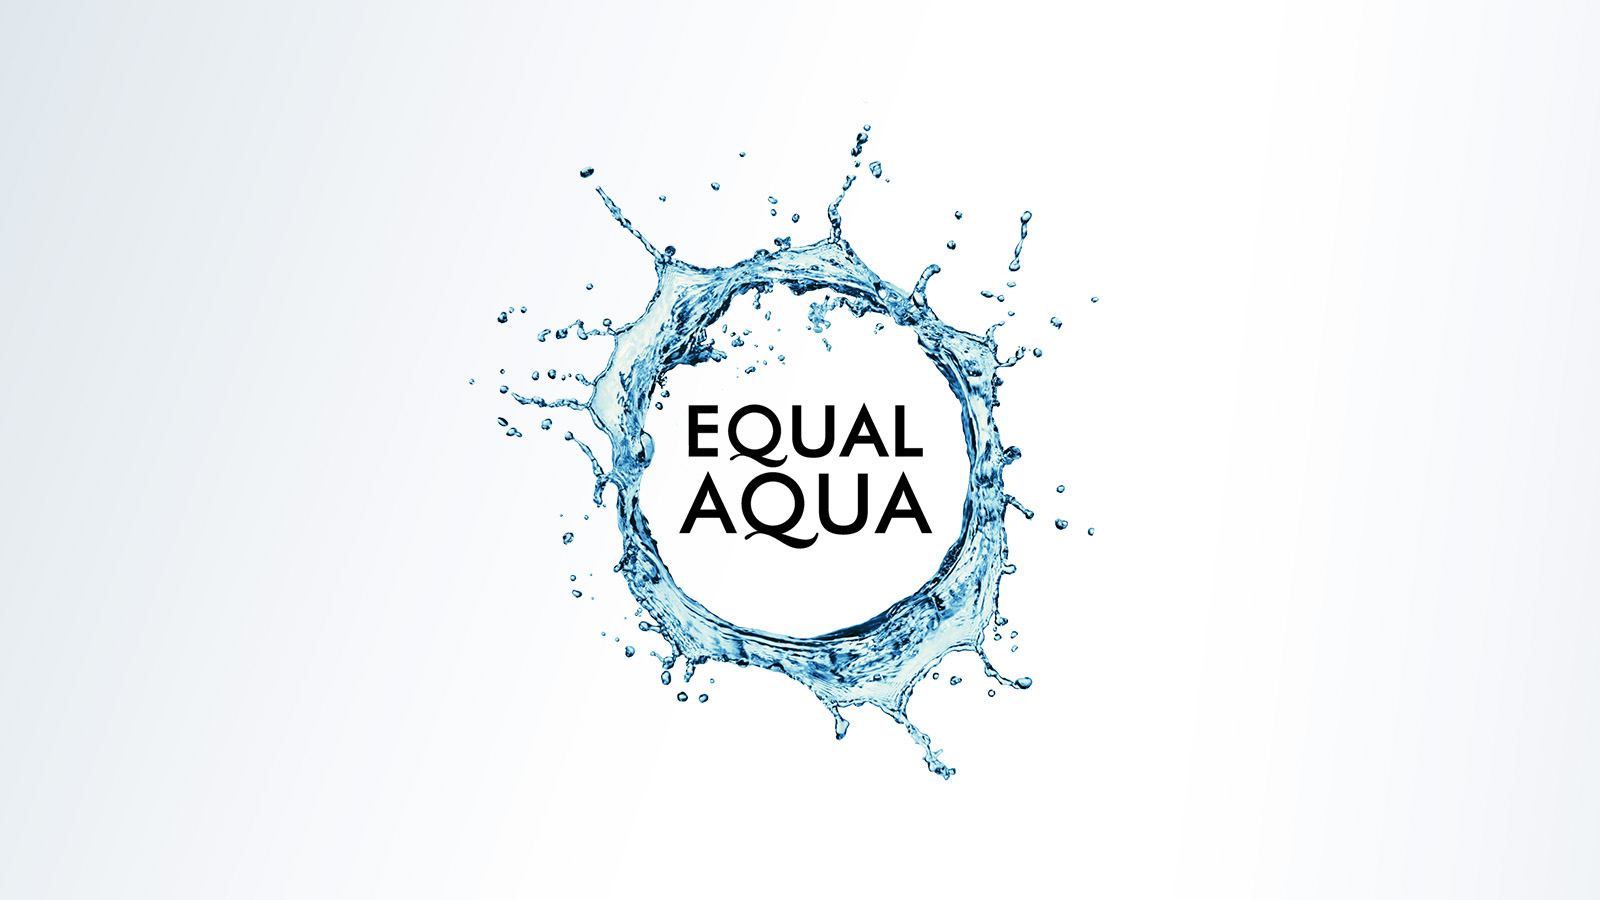 Celebrating International Women's Day on 8 March: IAWD joins Equal Aqua!